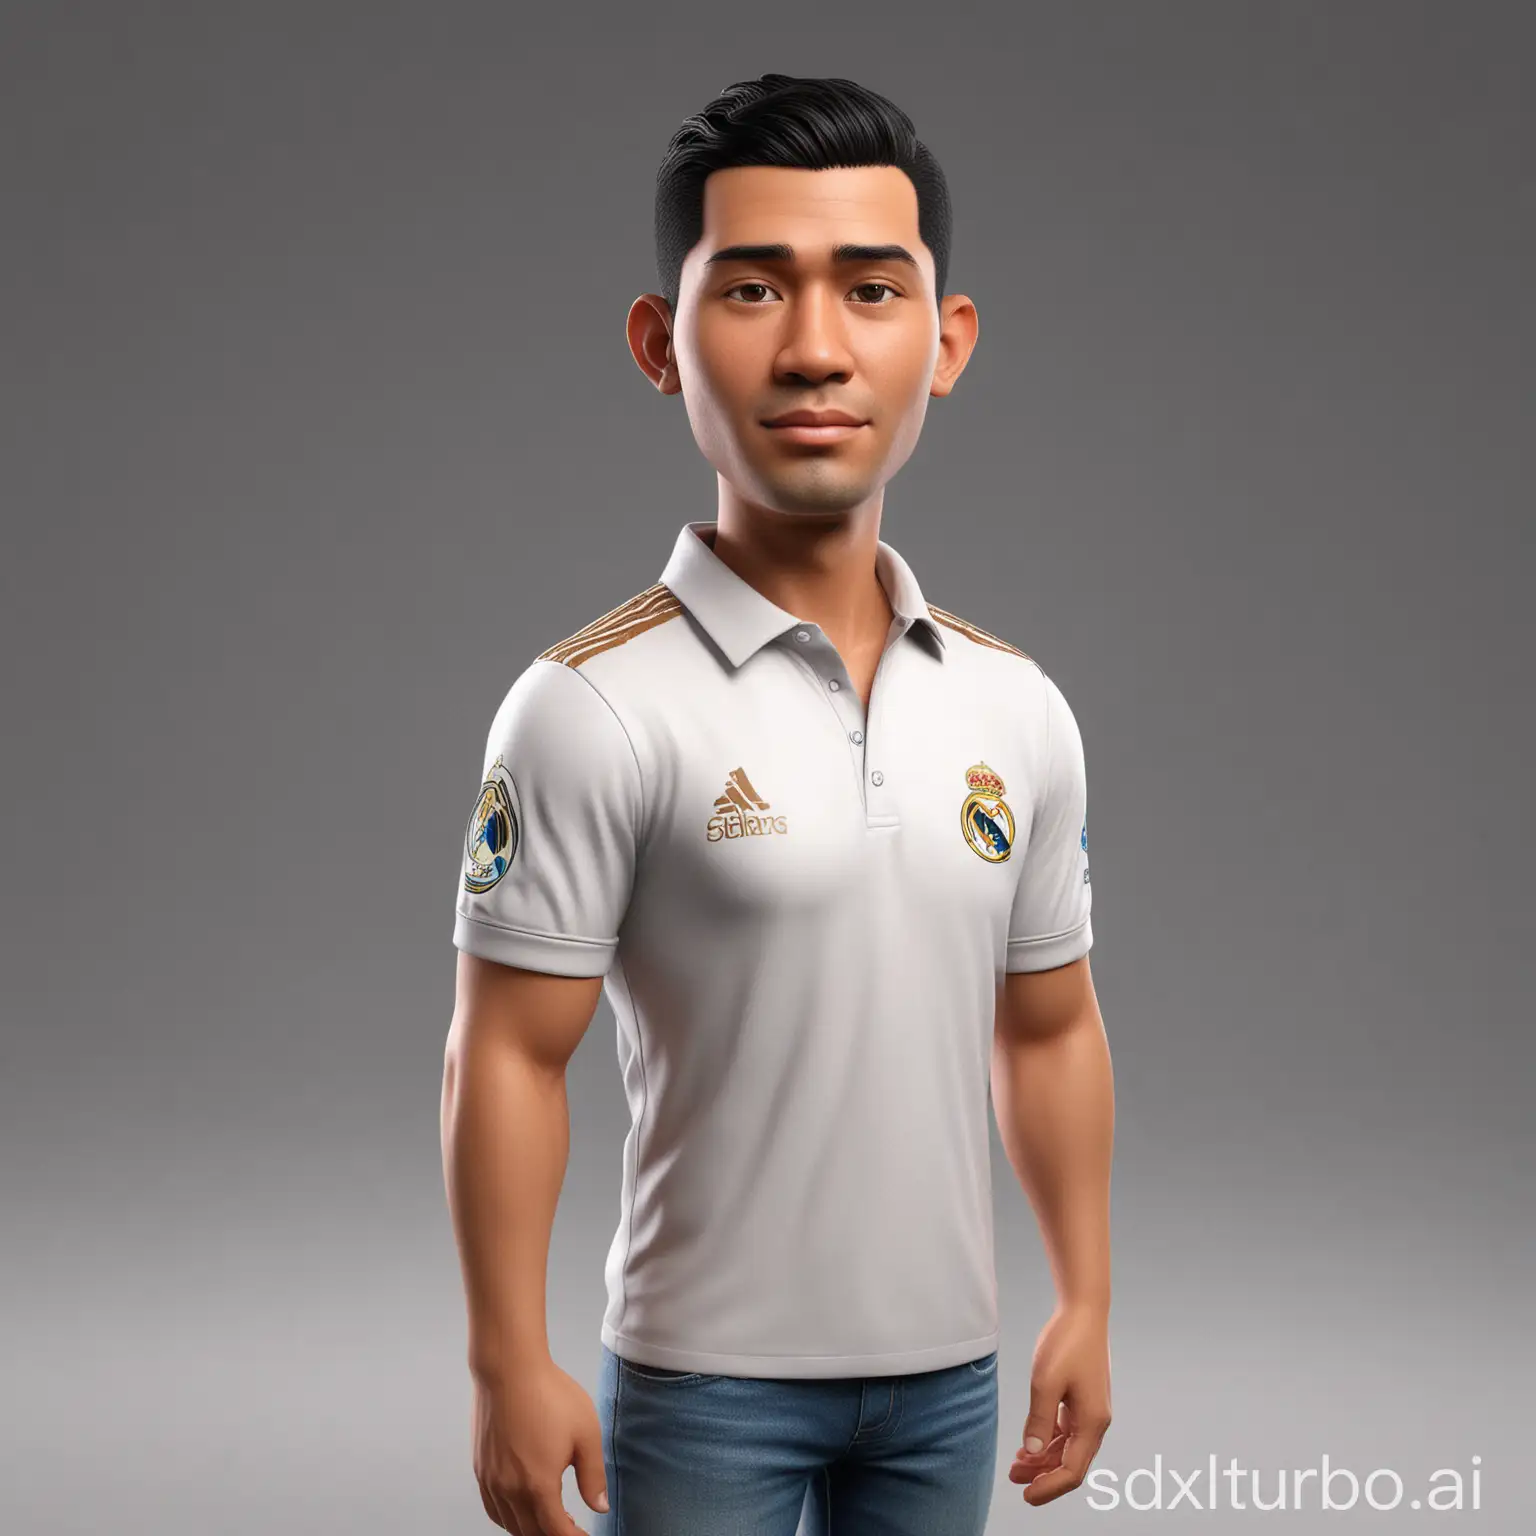 Create 3D cartoon style full body with a big head. A 40 year old Indonesian man. Tall, slightly thin body, oval face shape. Oval chin, handsome, slightly round eyes, clean white skin, faint smile. Black hair with a side part. Wearing a white shirt of real madrid. Body position is clearly visible. Background colored peach solid. Use soft photography lighting, hair lighting, top lighting, side lighting. Highest quality photos, Uhd,16k.